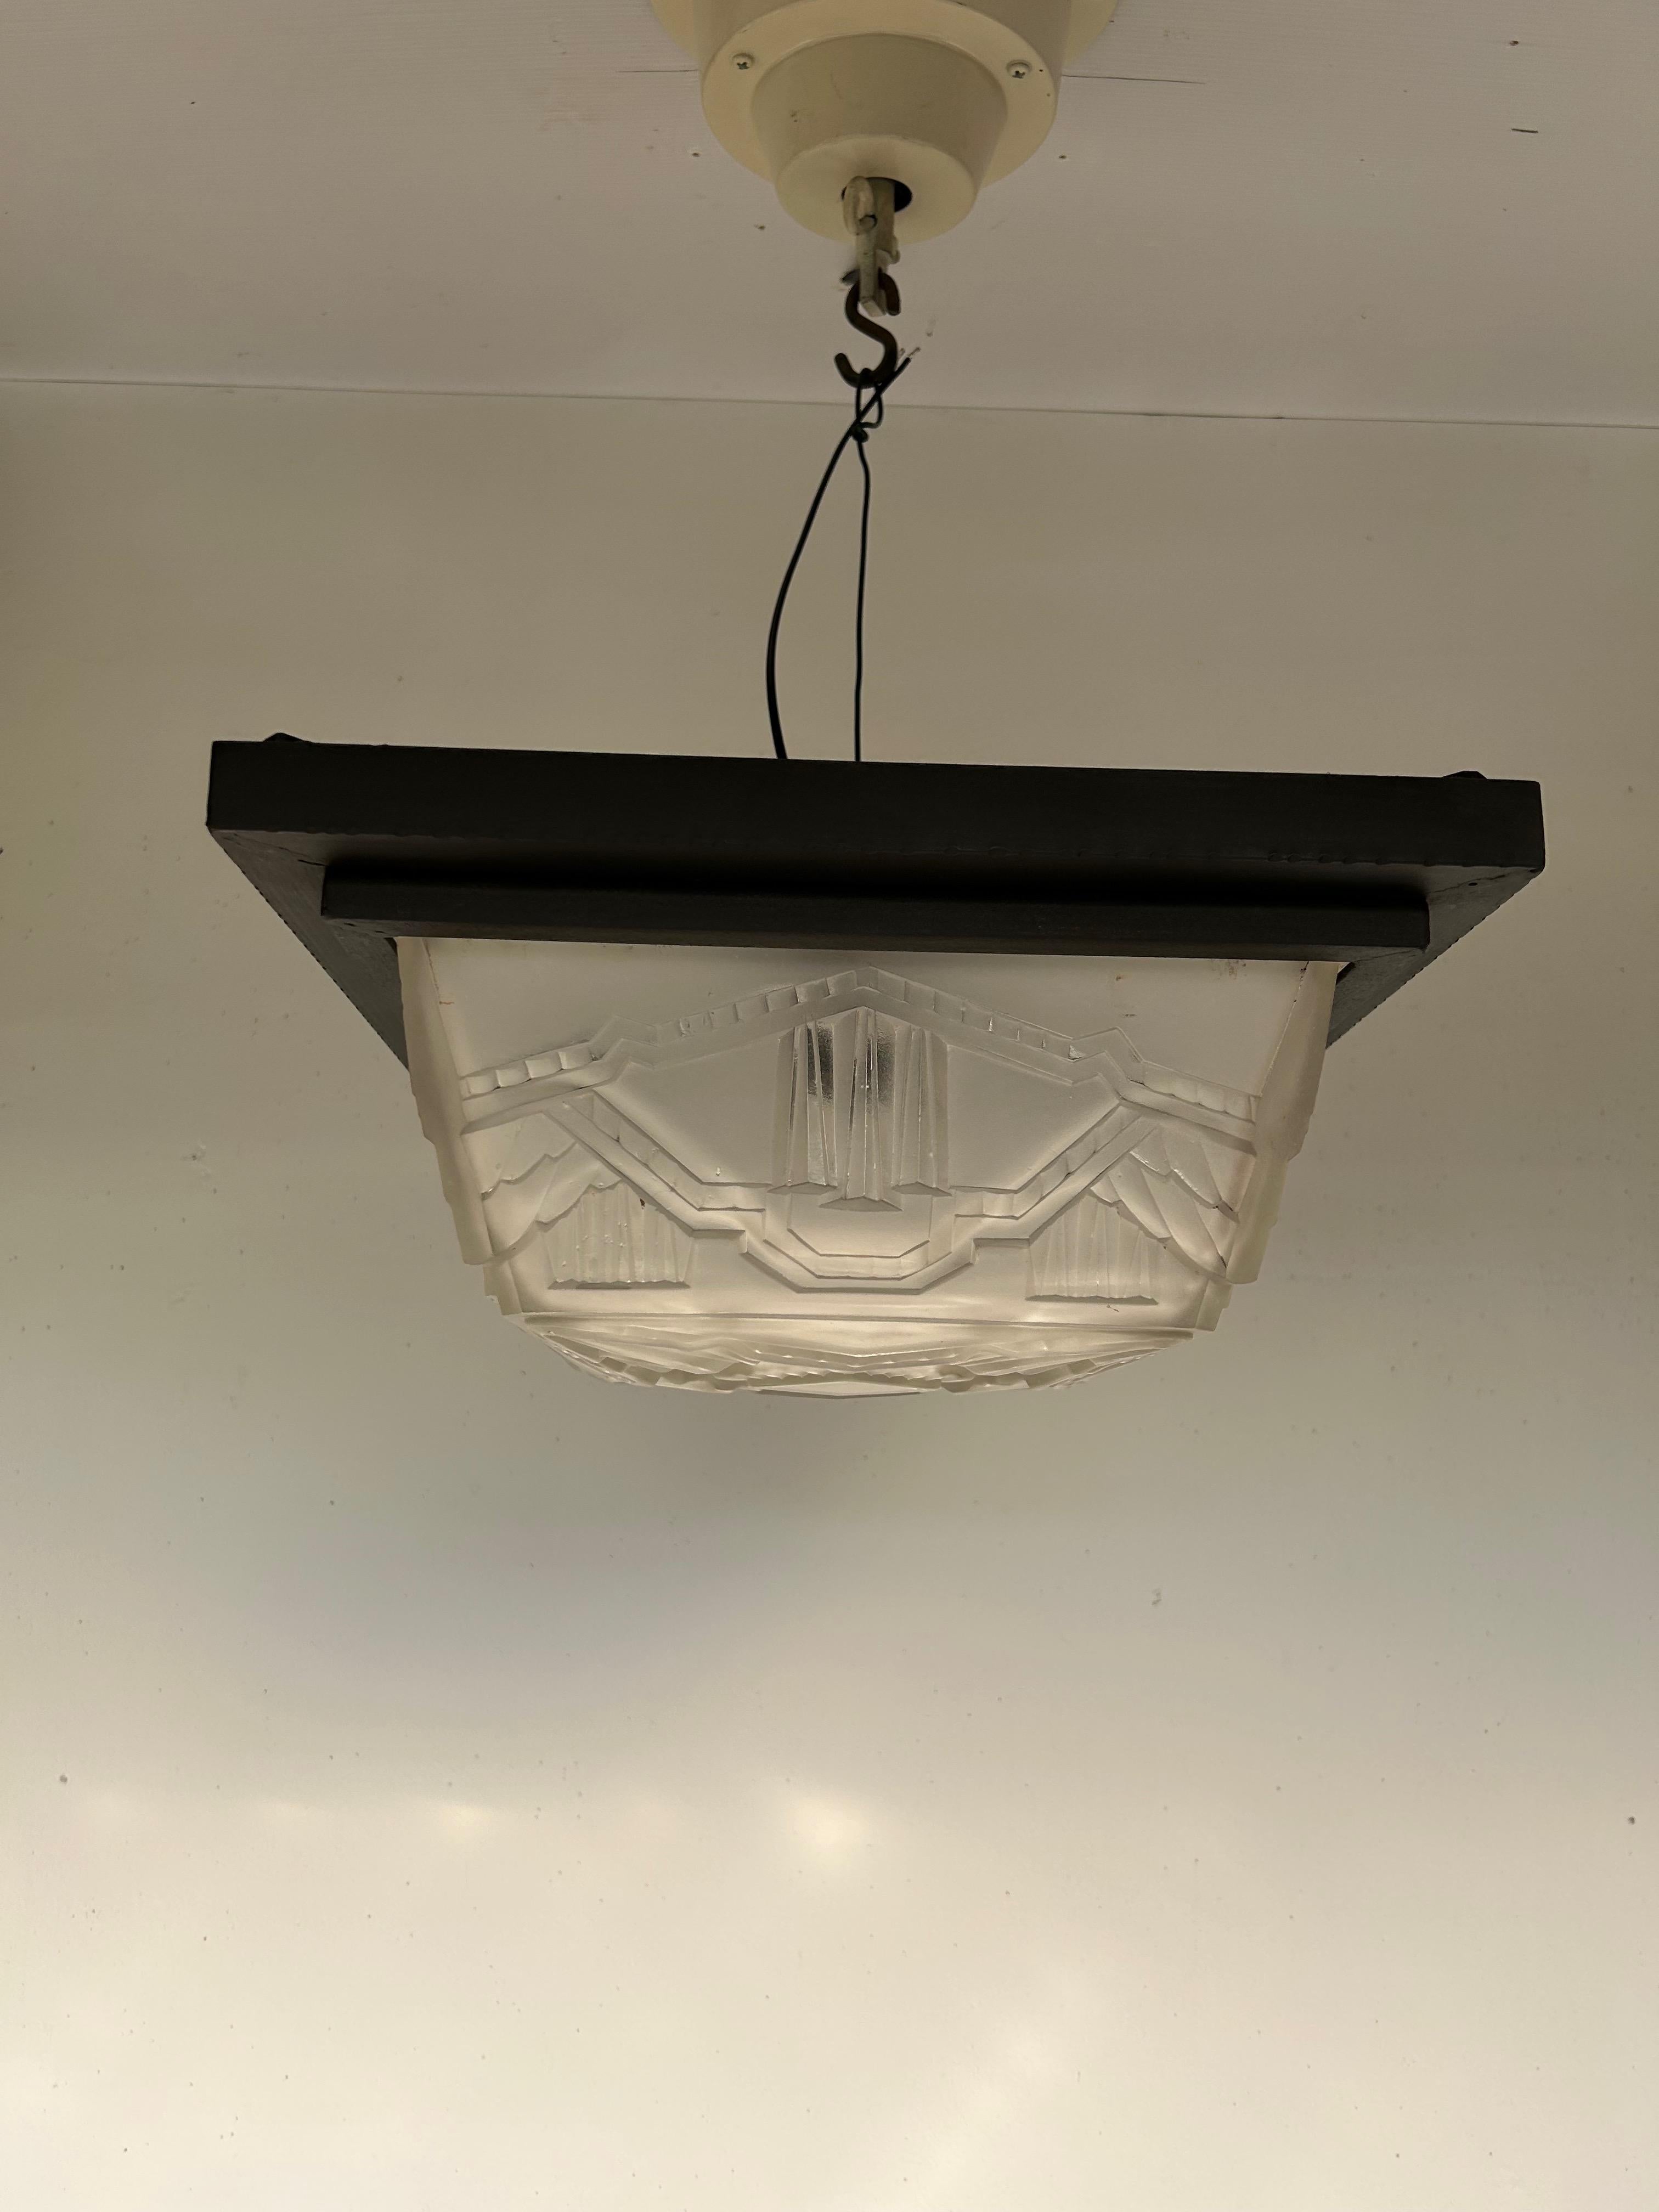 Art deco ceiling light circa 1930. wrought iron frame with black patina and molded glass with geometric decoration in the style of Hettier and Vincent, superb quality of molded glass, in perfect condition, electrified, B 22 socket, 100W LED screw